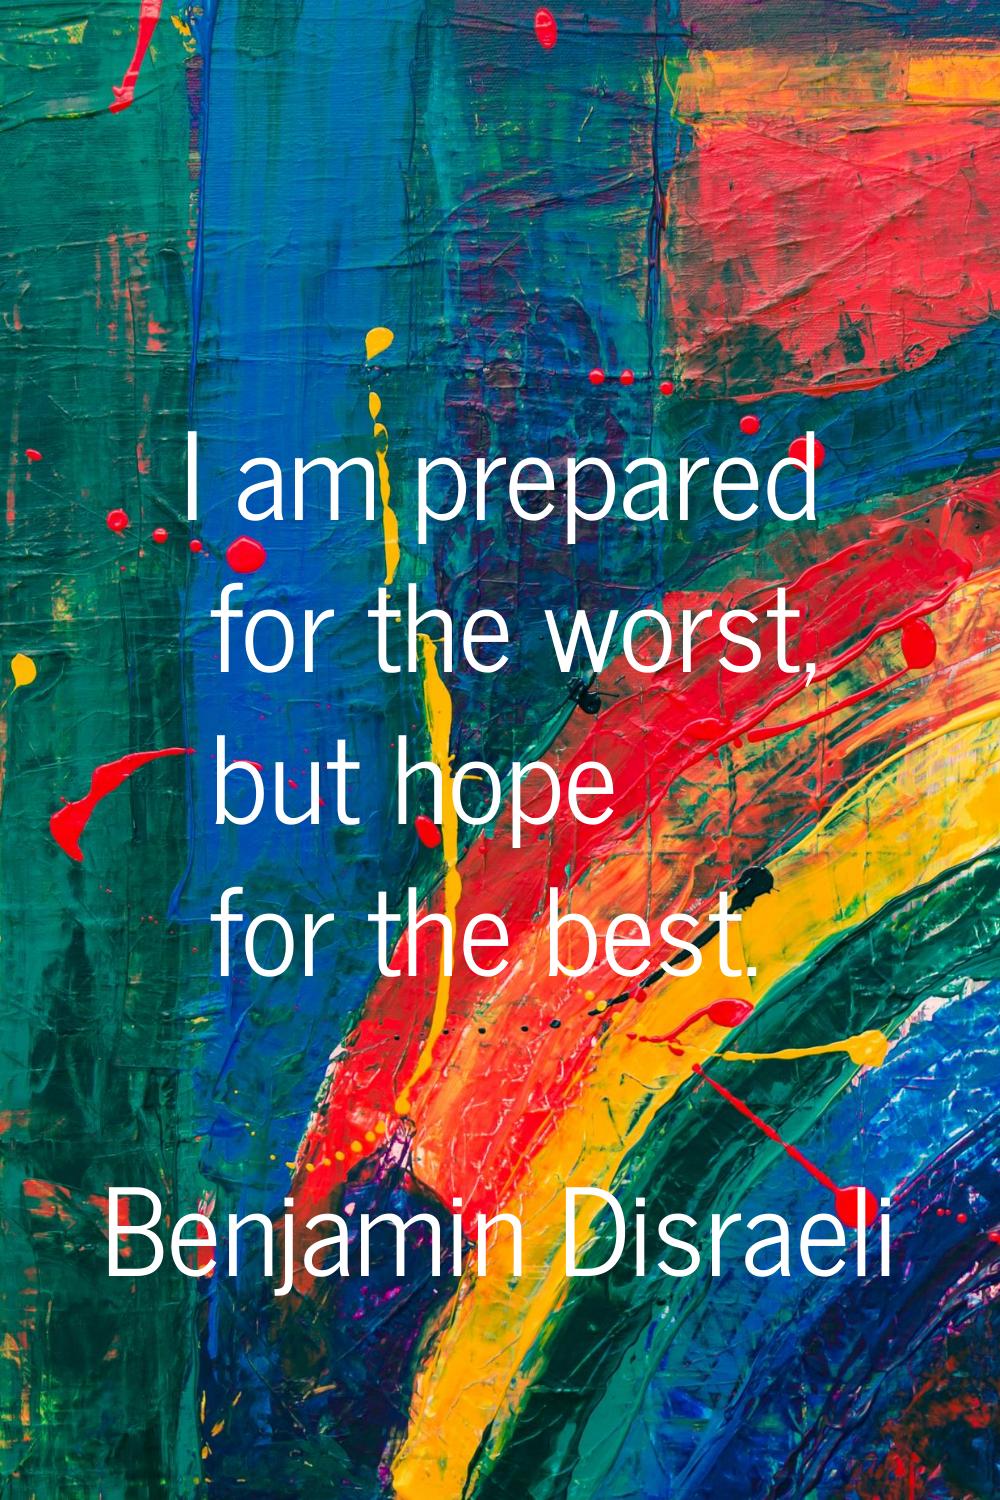 I am prepared for the worst, but hope for the best.